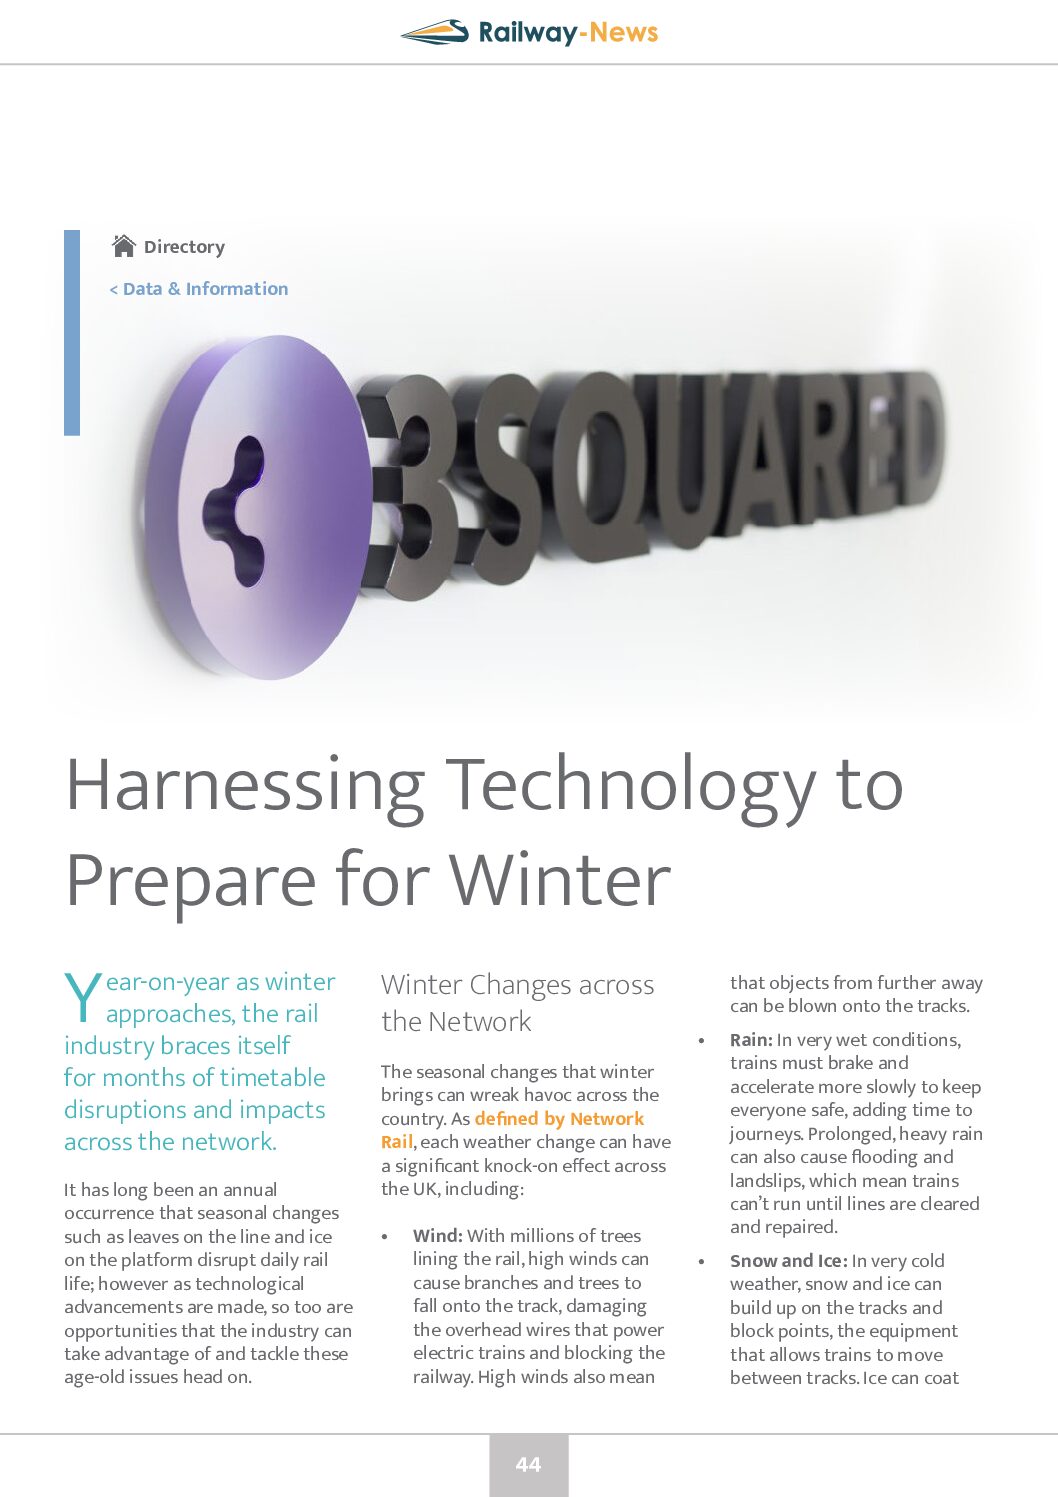 3Squared – Harnessing Technology to Prepare for Winter